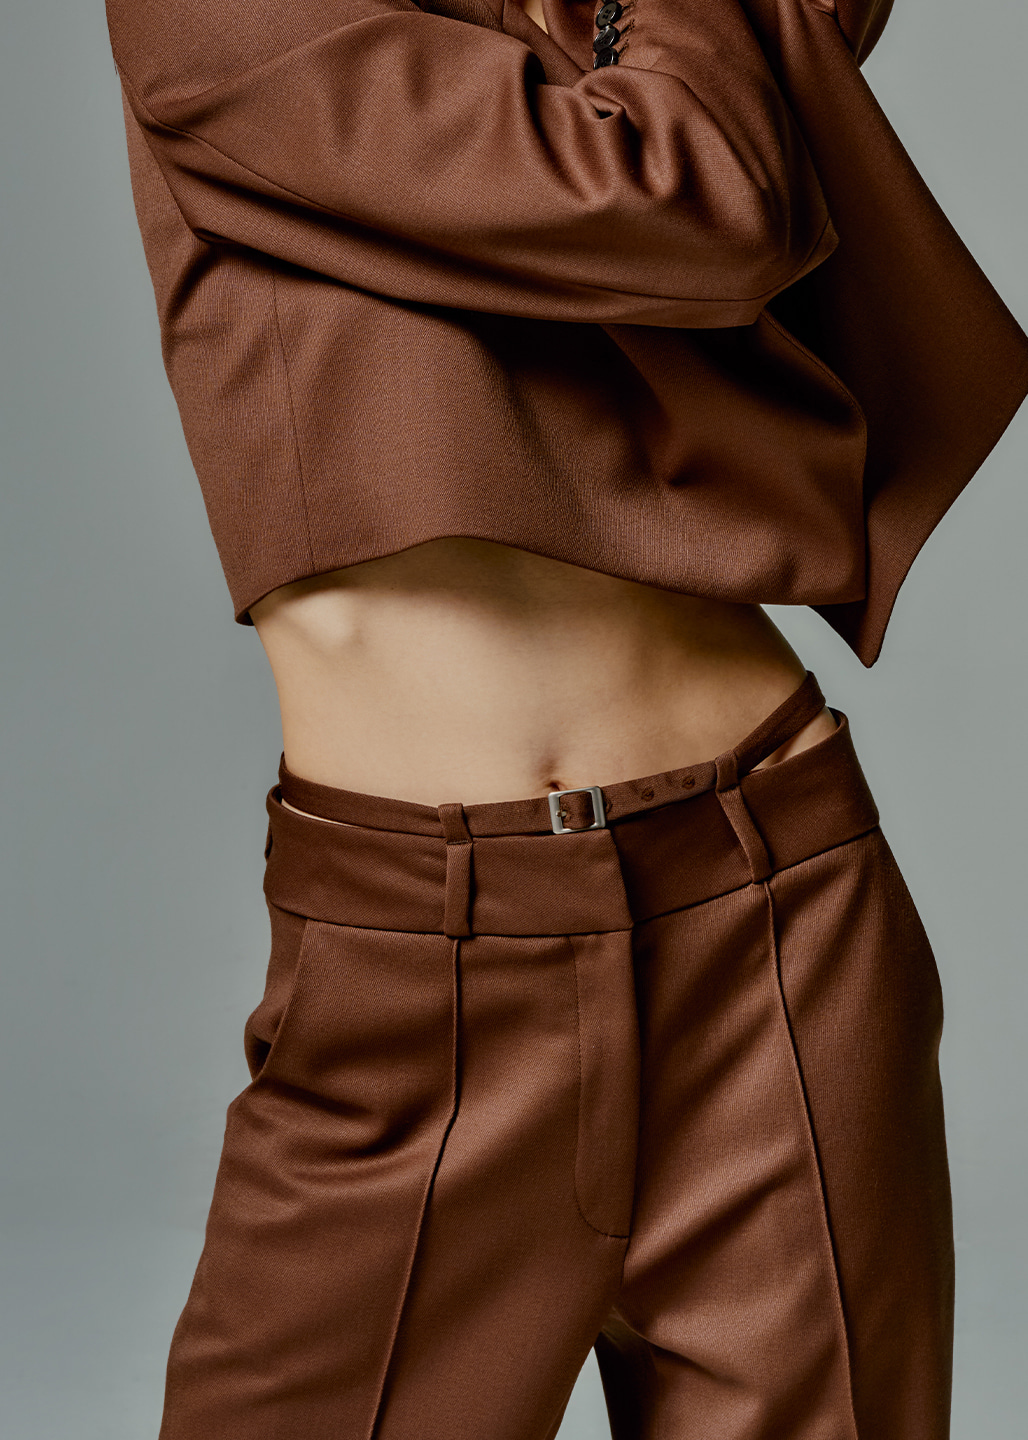 FW21 WIDE BELTED PANTS - ALMOND CAP